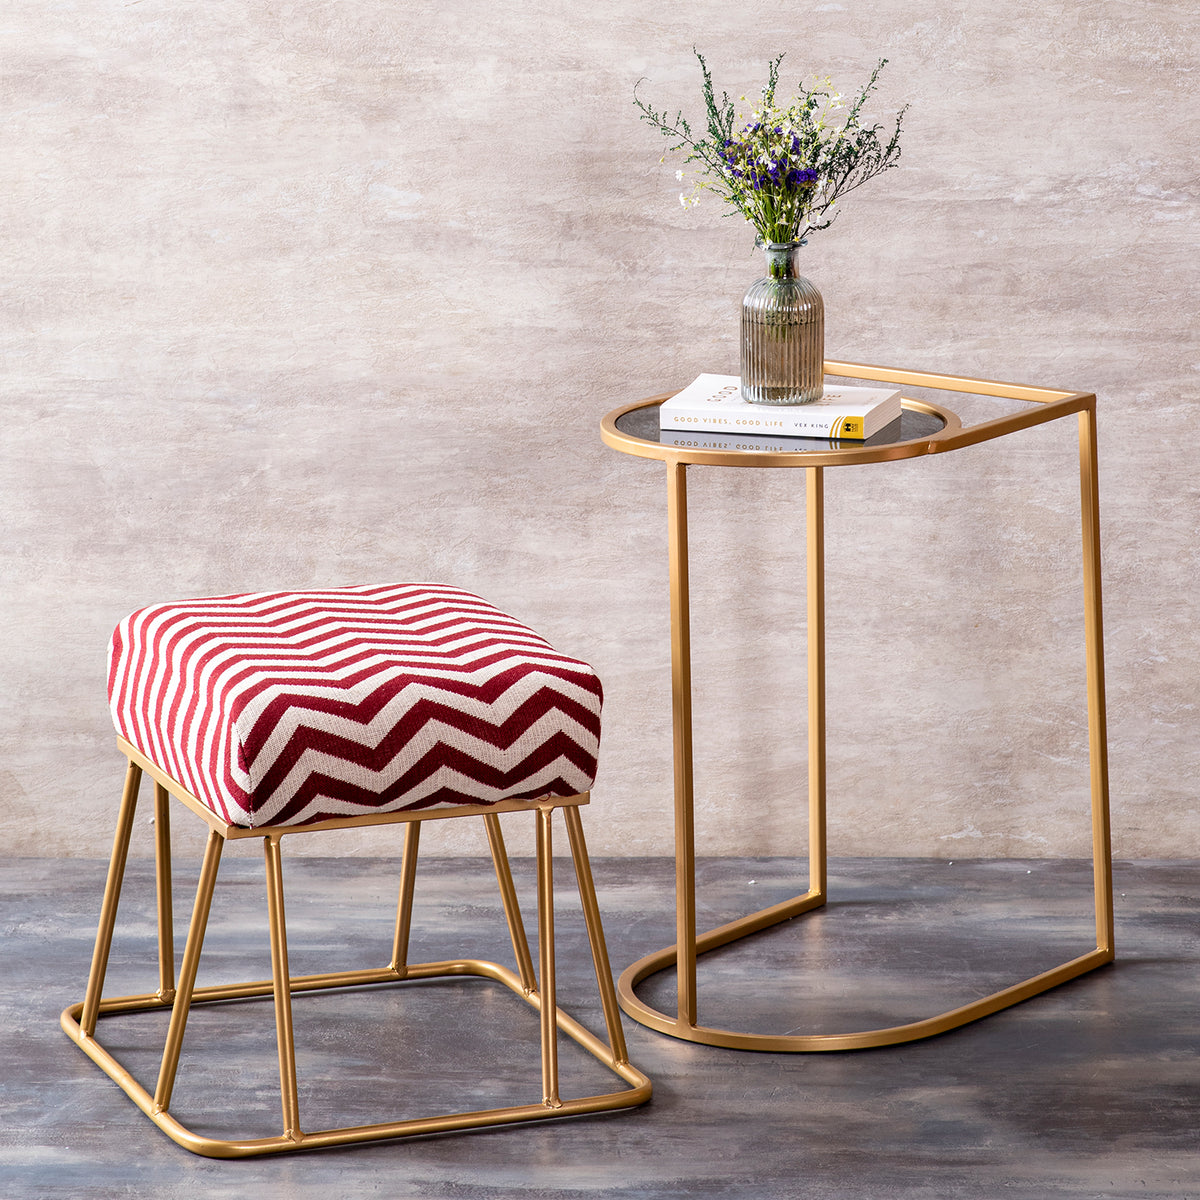 New Metallic Ottomans with Table